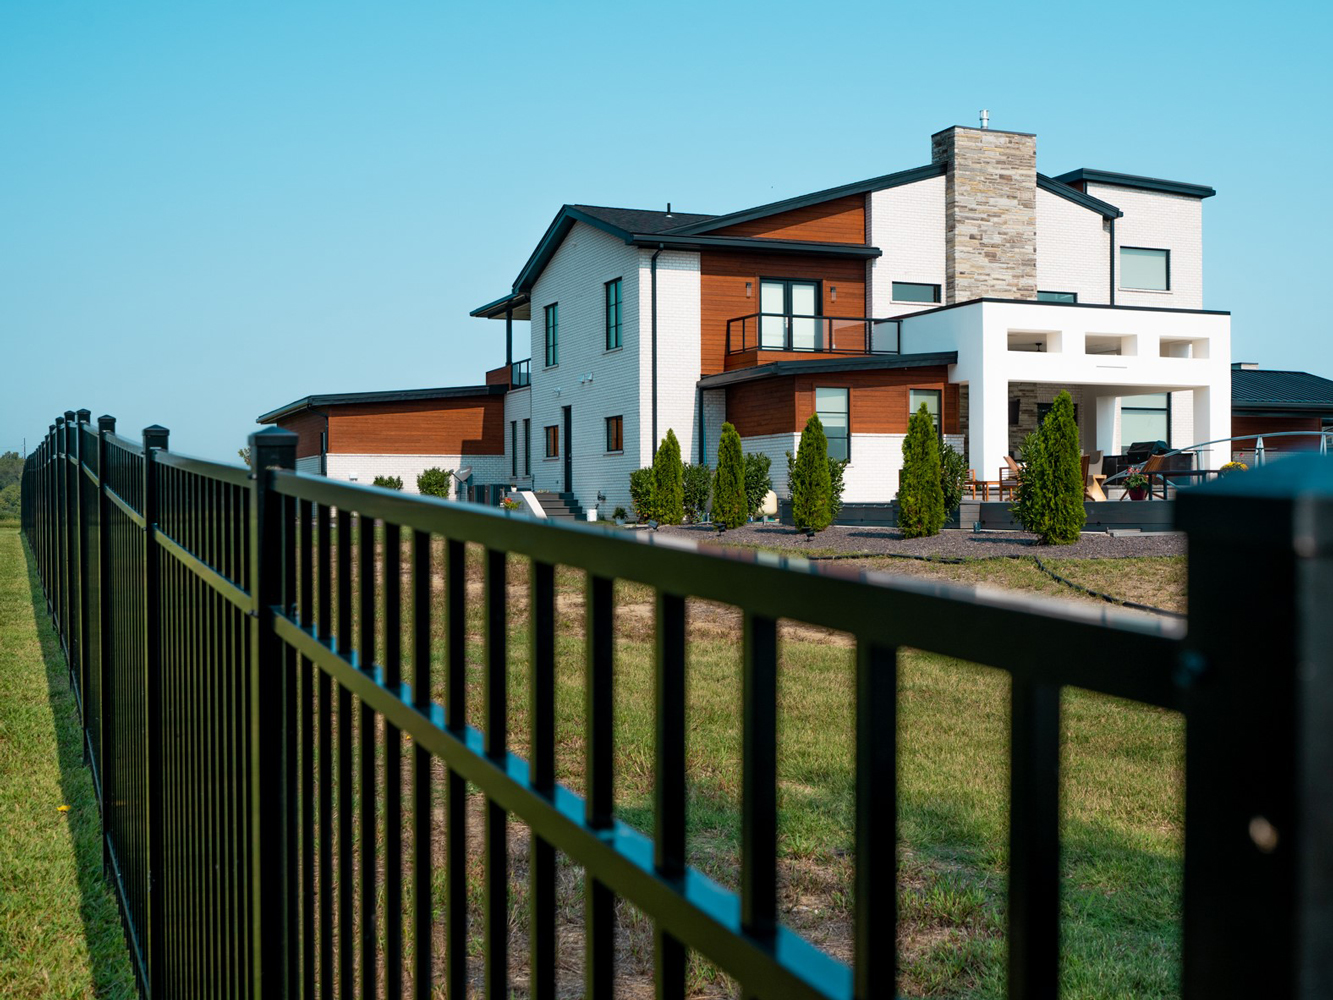 Aluminum Fencing: A Great Choice for Your Kentucky Residential Fence